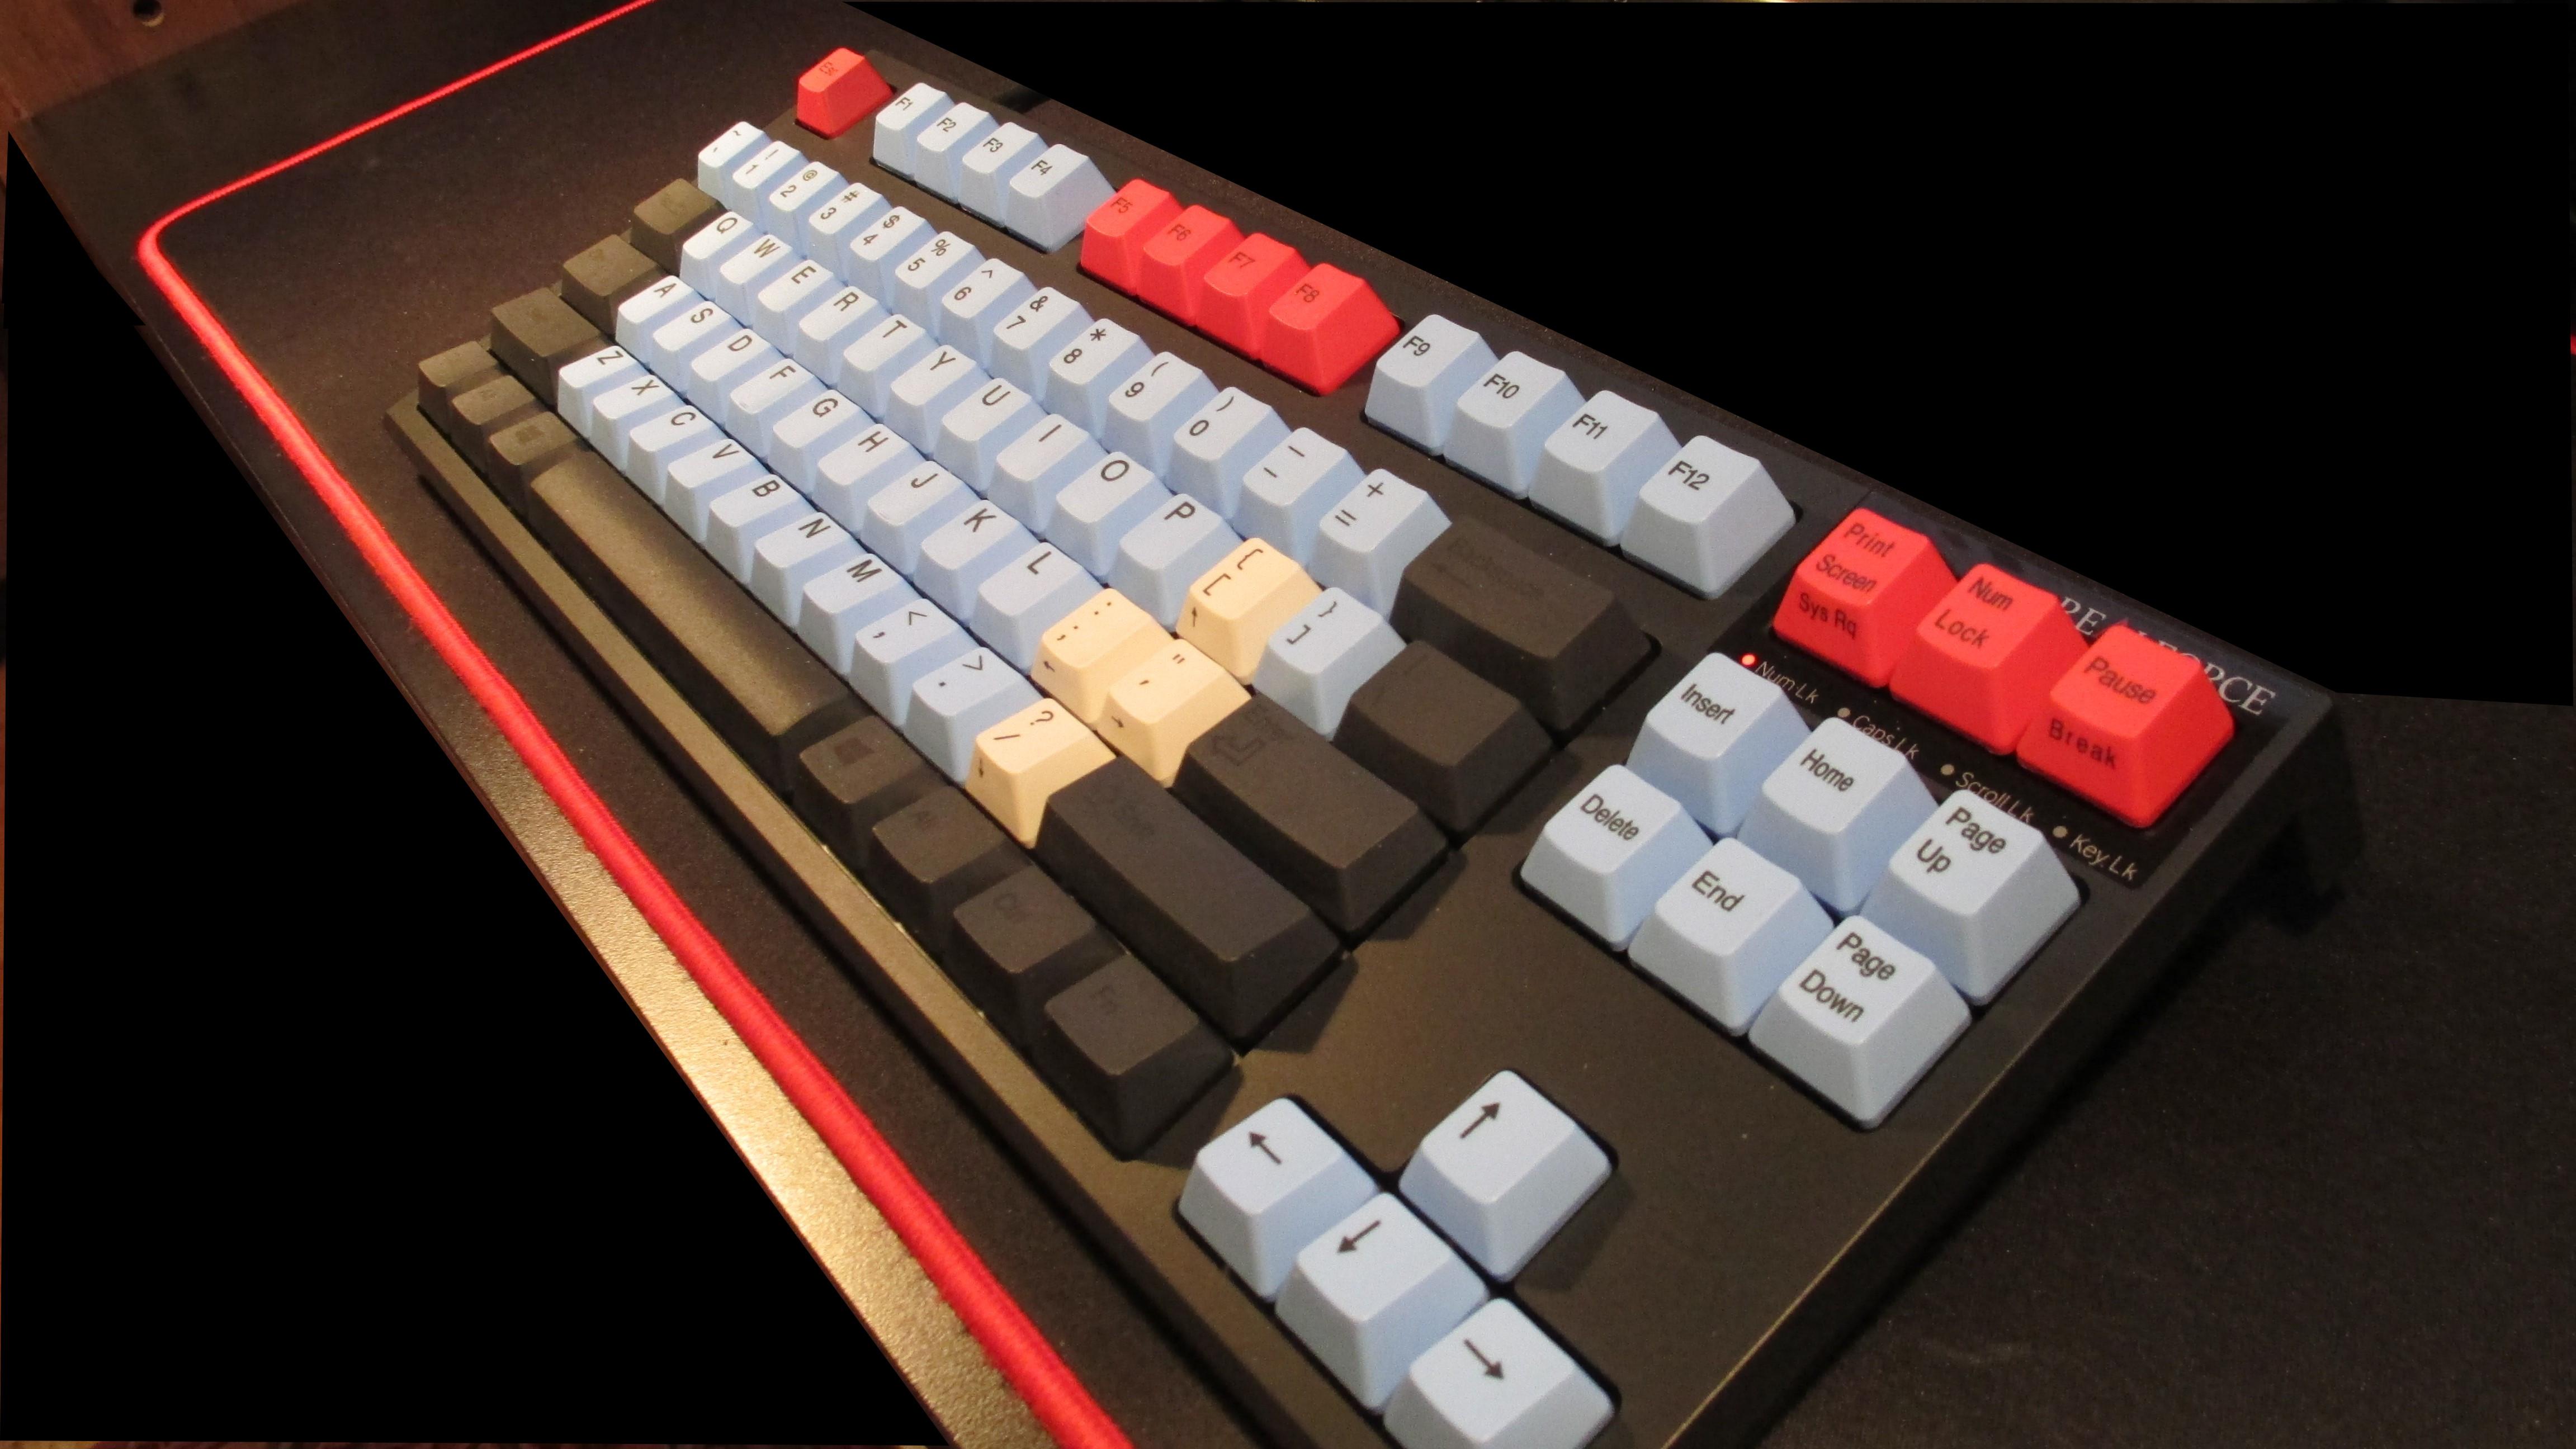 Realforce R2 PFU Limited Edition